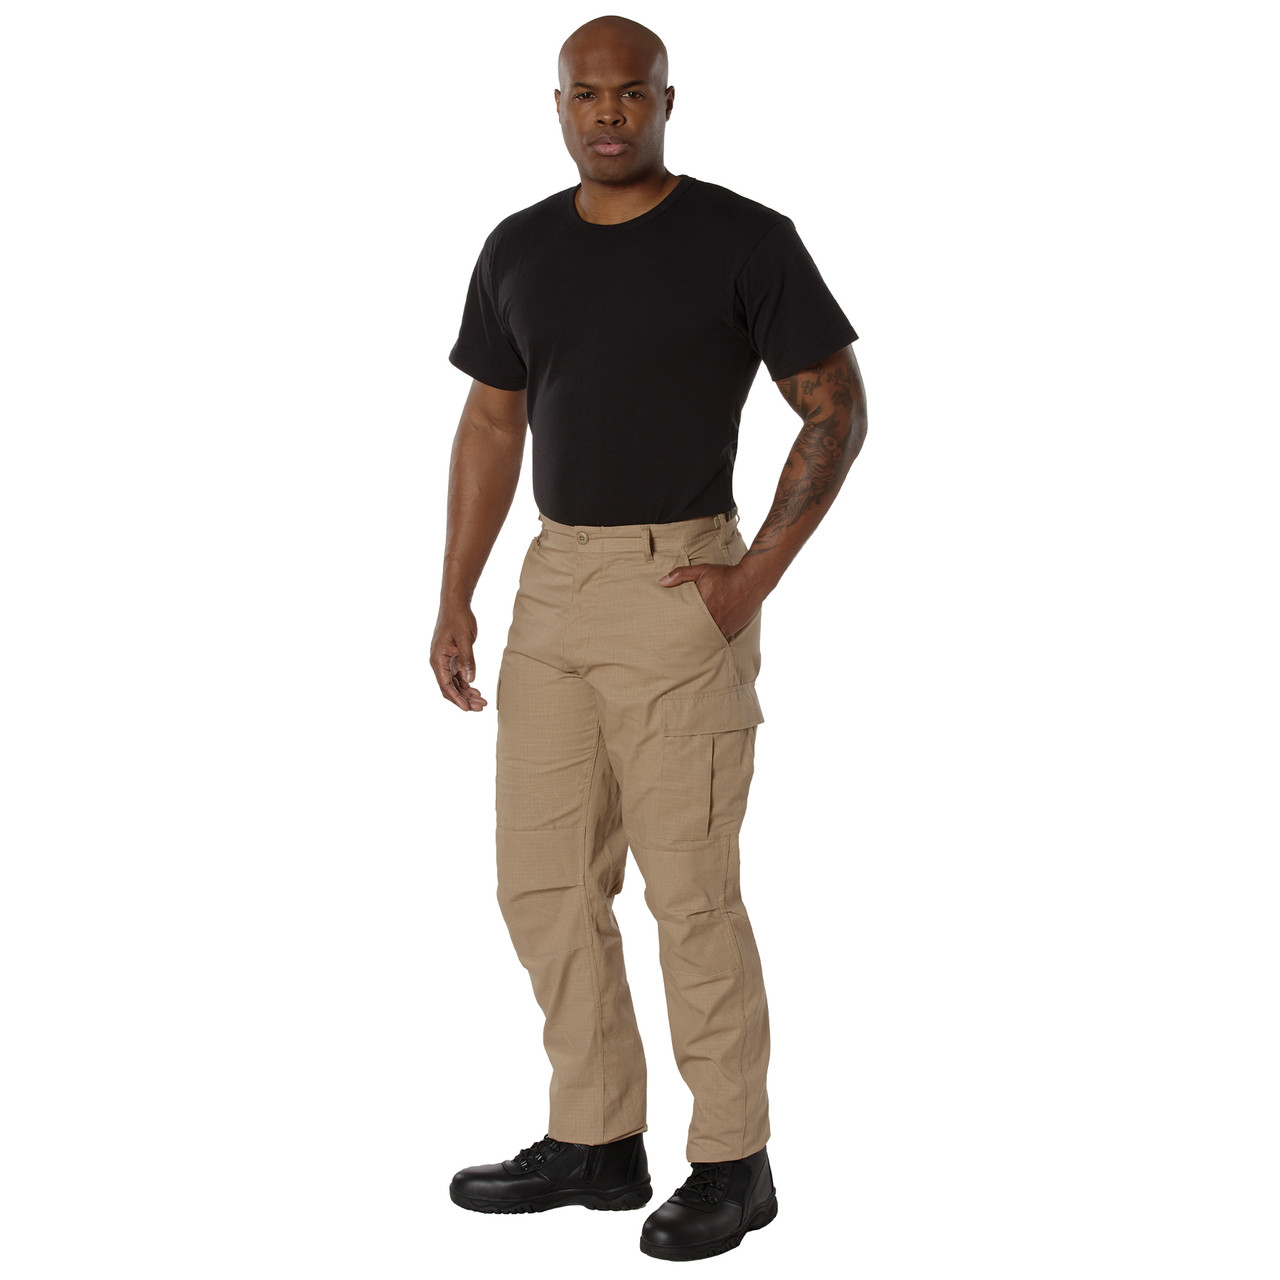 Basic Issue Military BDU Pants - Solid Colors